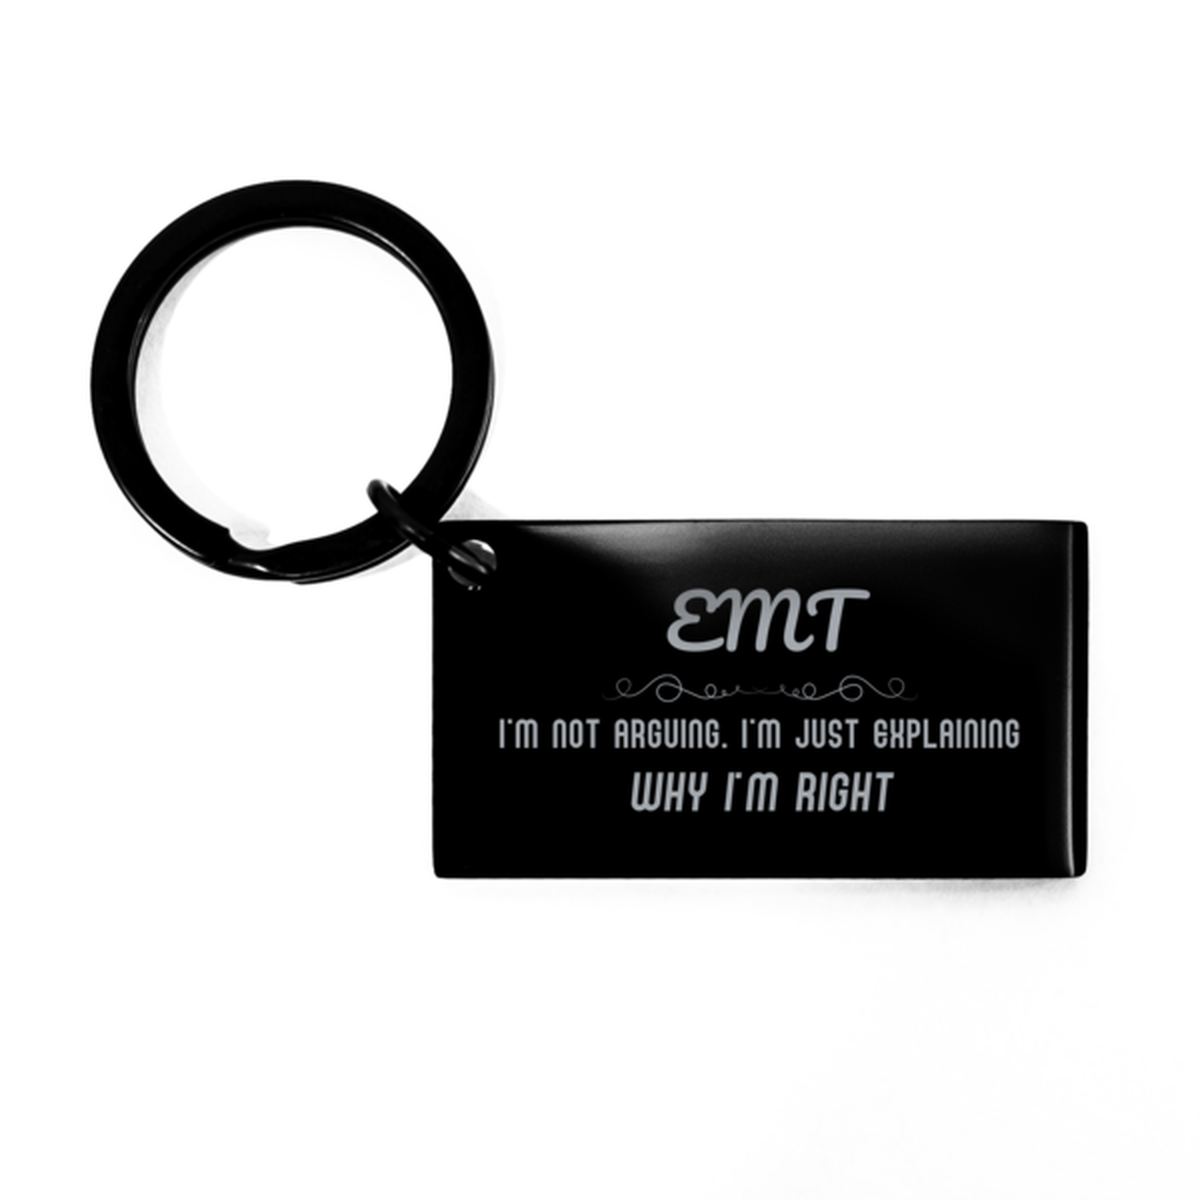 EMT I'm not Arguing. I'm Just Explaining Why I'm RIGHT Keychain, Funny Saying Quote EMT Gifts For EMT Graduation Birthday Christmas Gifts for Men Women Coworker